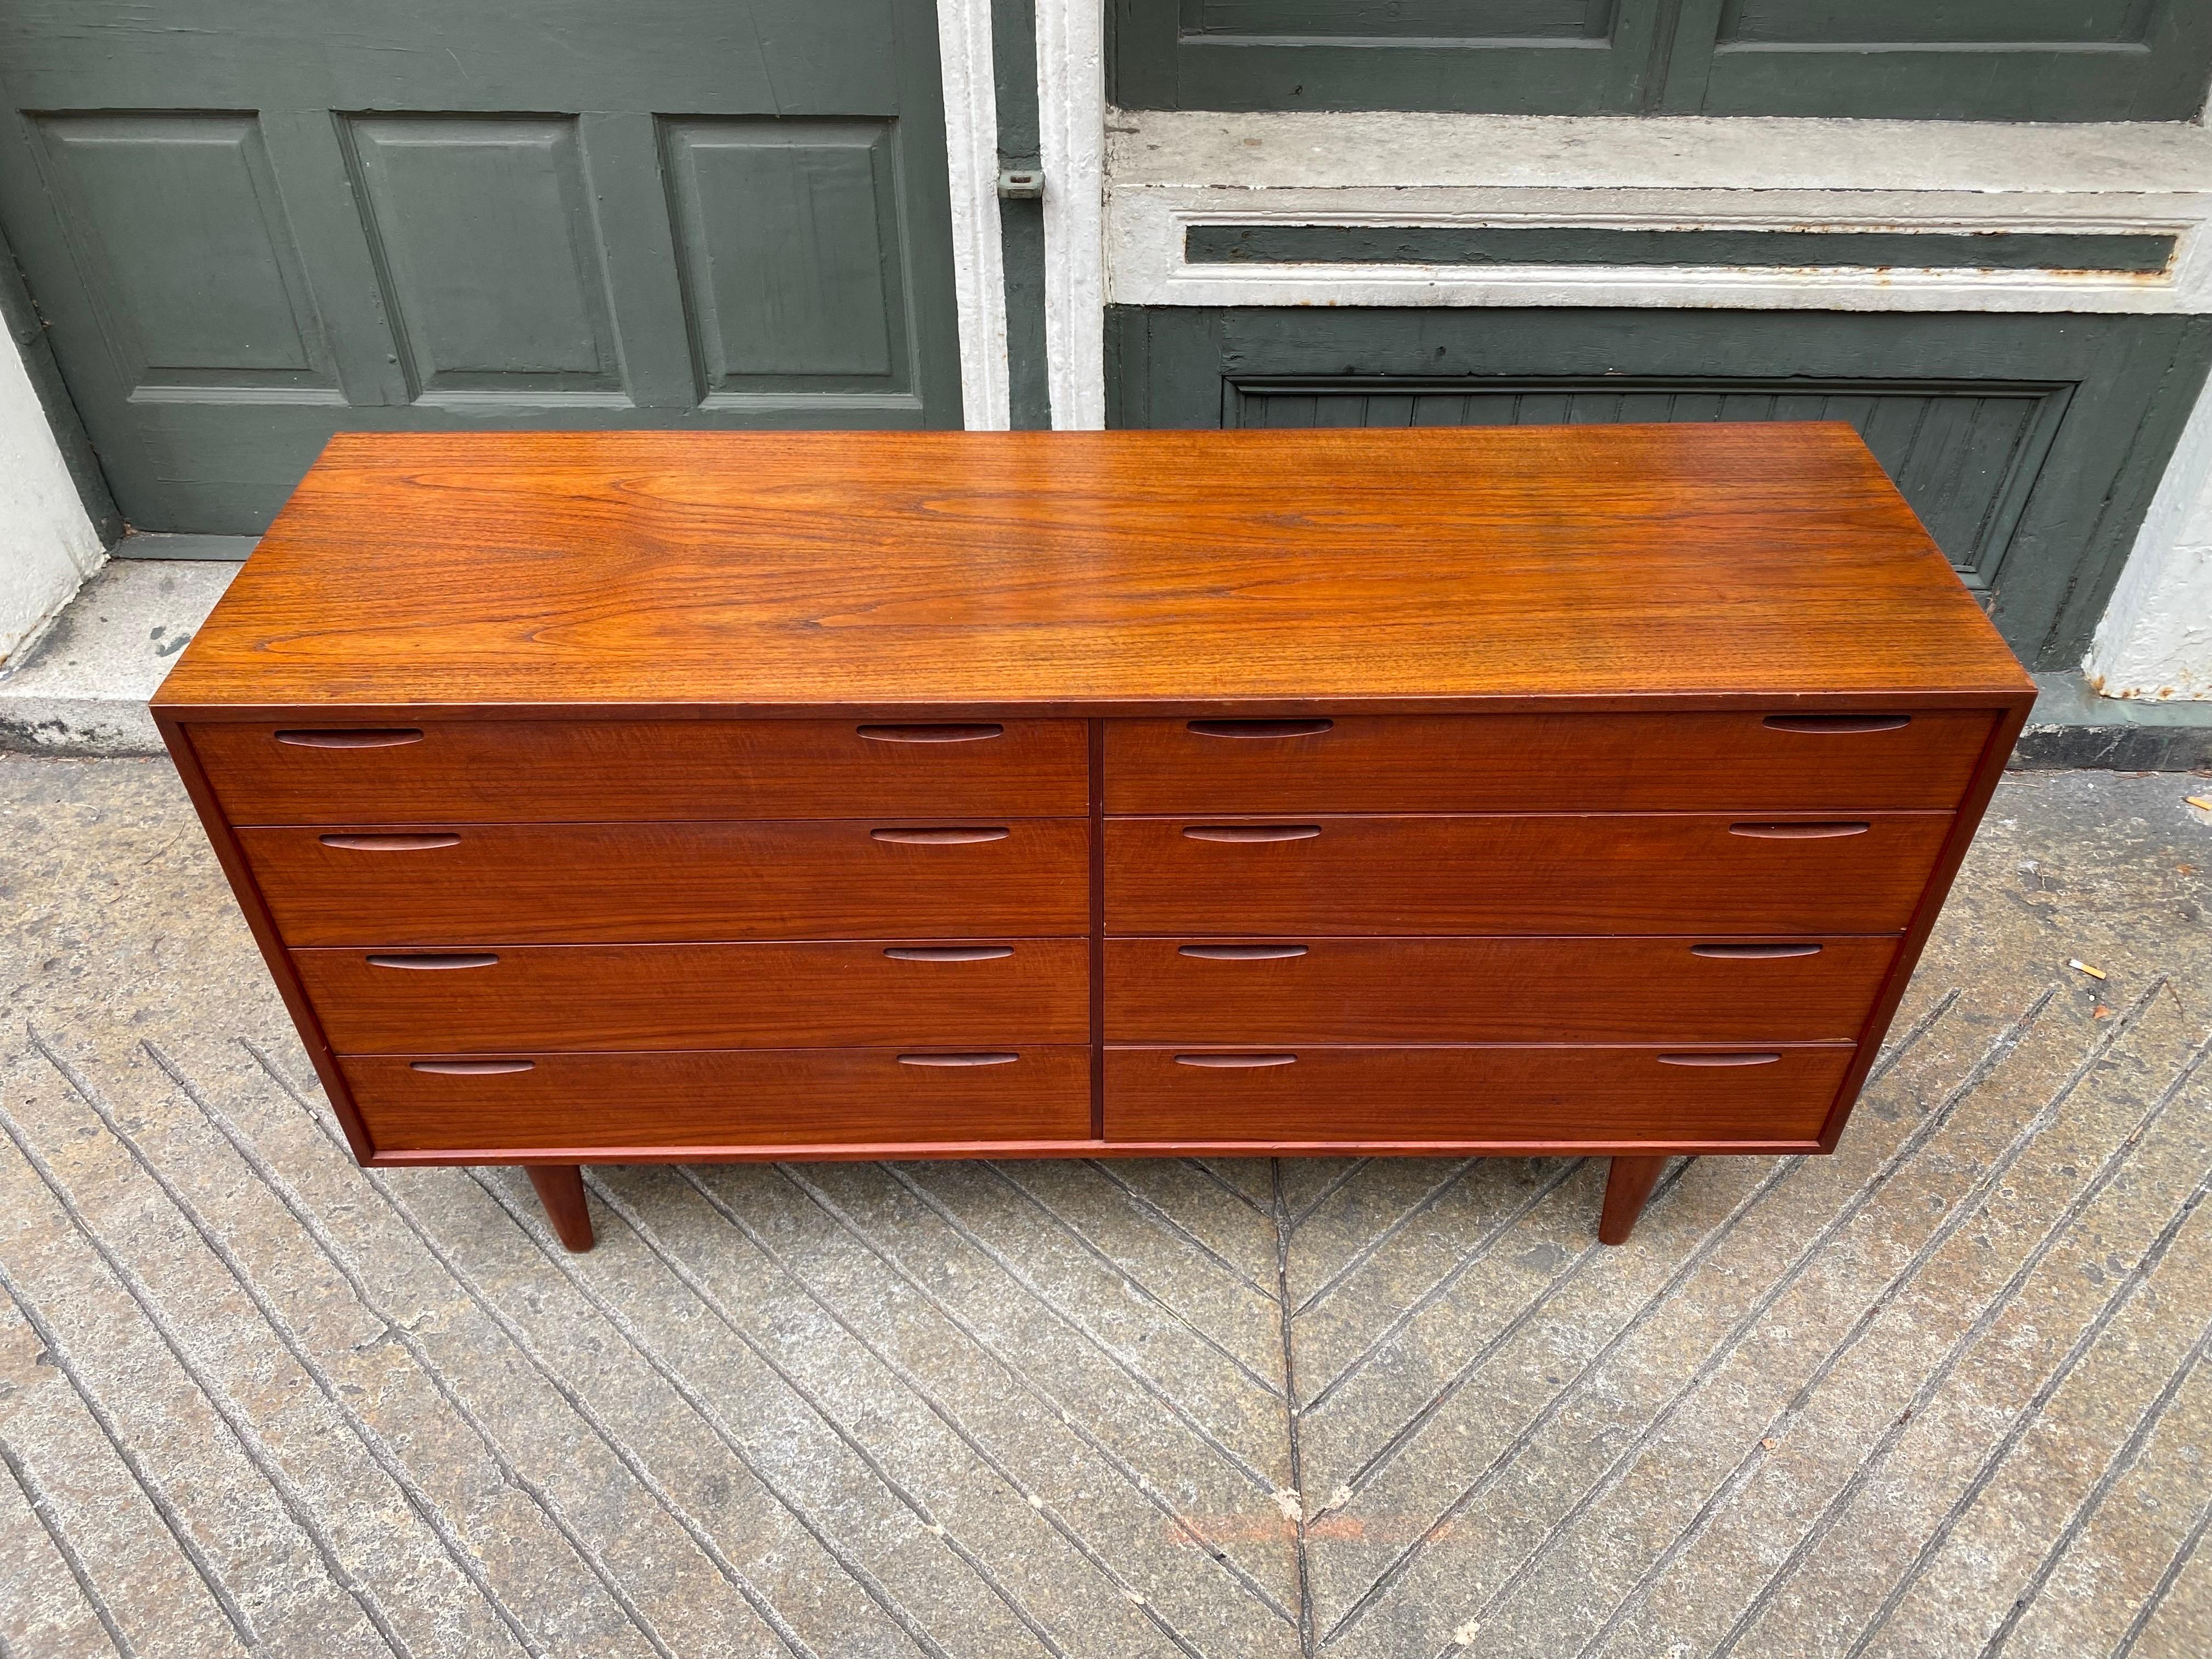 Ib Kofod Larsen 8 Drawer Teak Dresser.  Recessed handles give this piece a very sleek stance.  Top has been refinished, everything else is original.  Very nice quality construction.  Drawers work properly and smoothly.